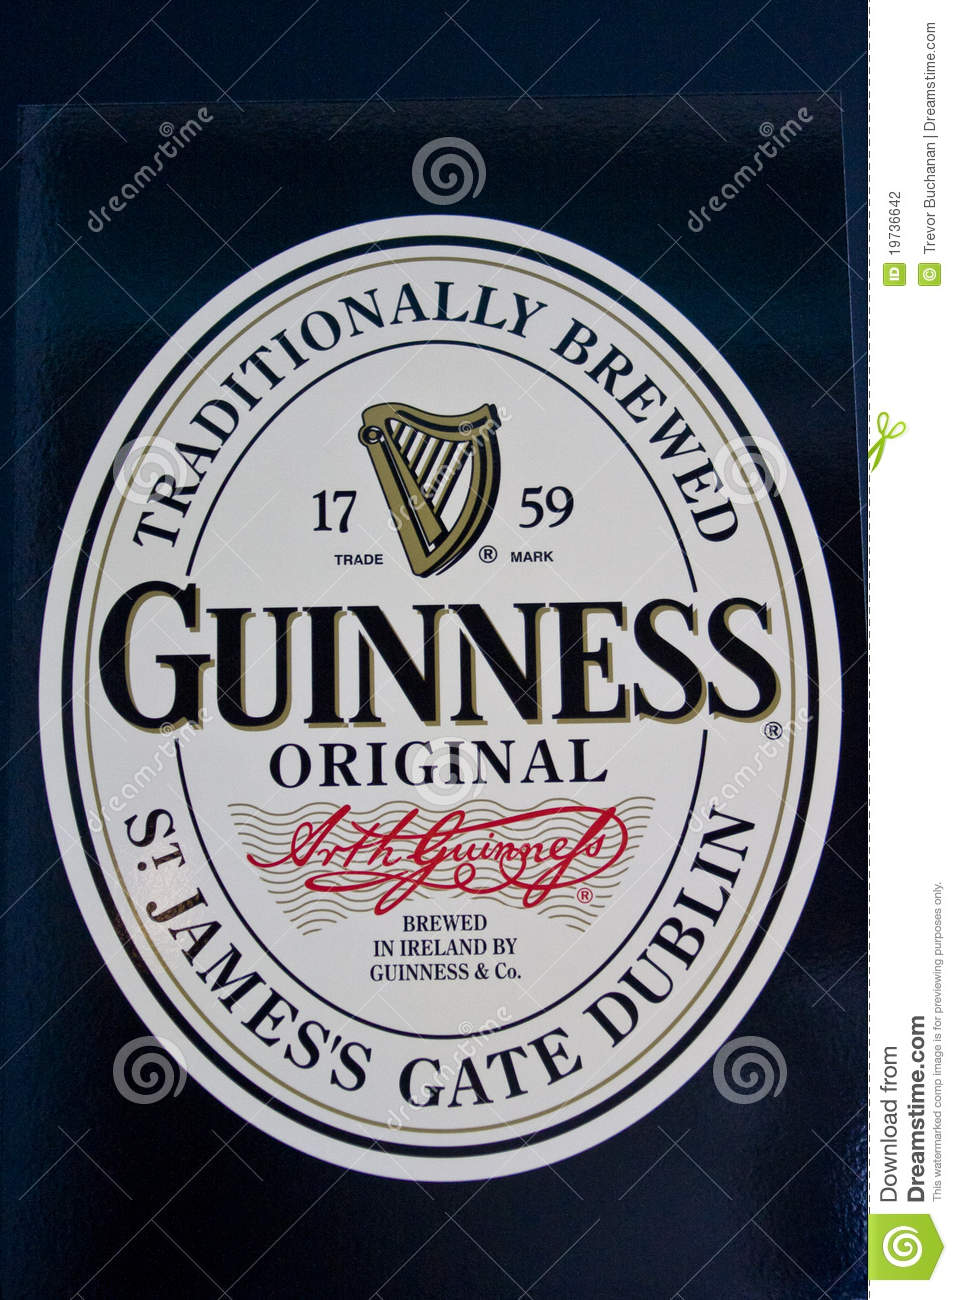 Logo Of The Famous Irish Brewery Guinness In Dublin Ireland